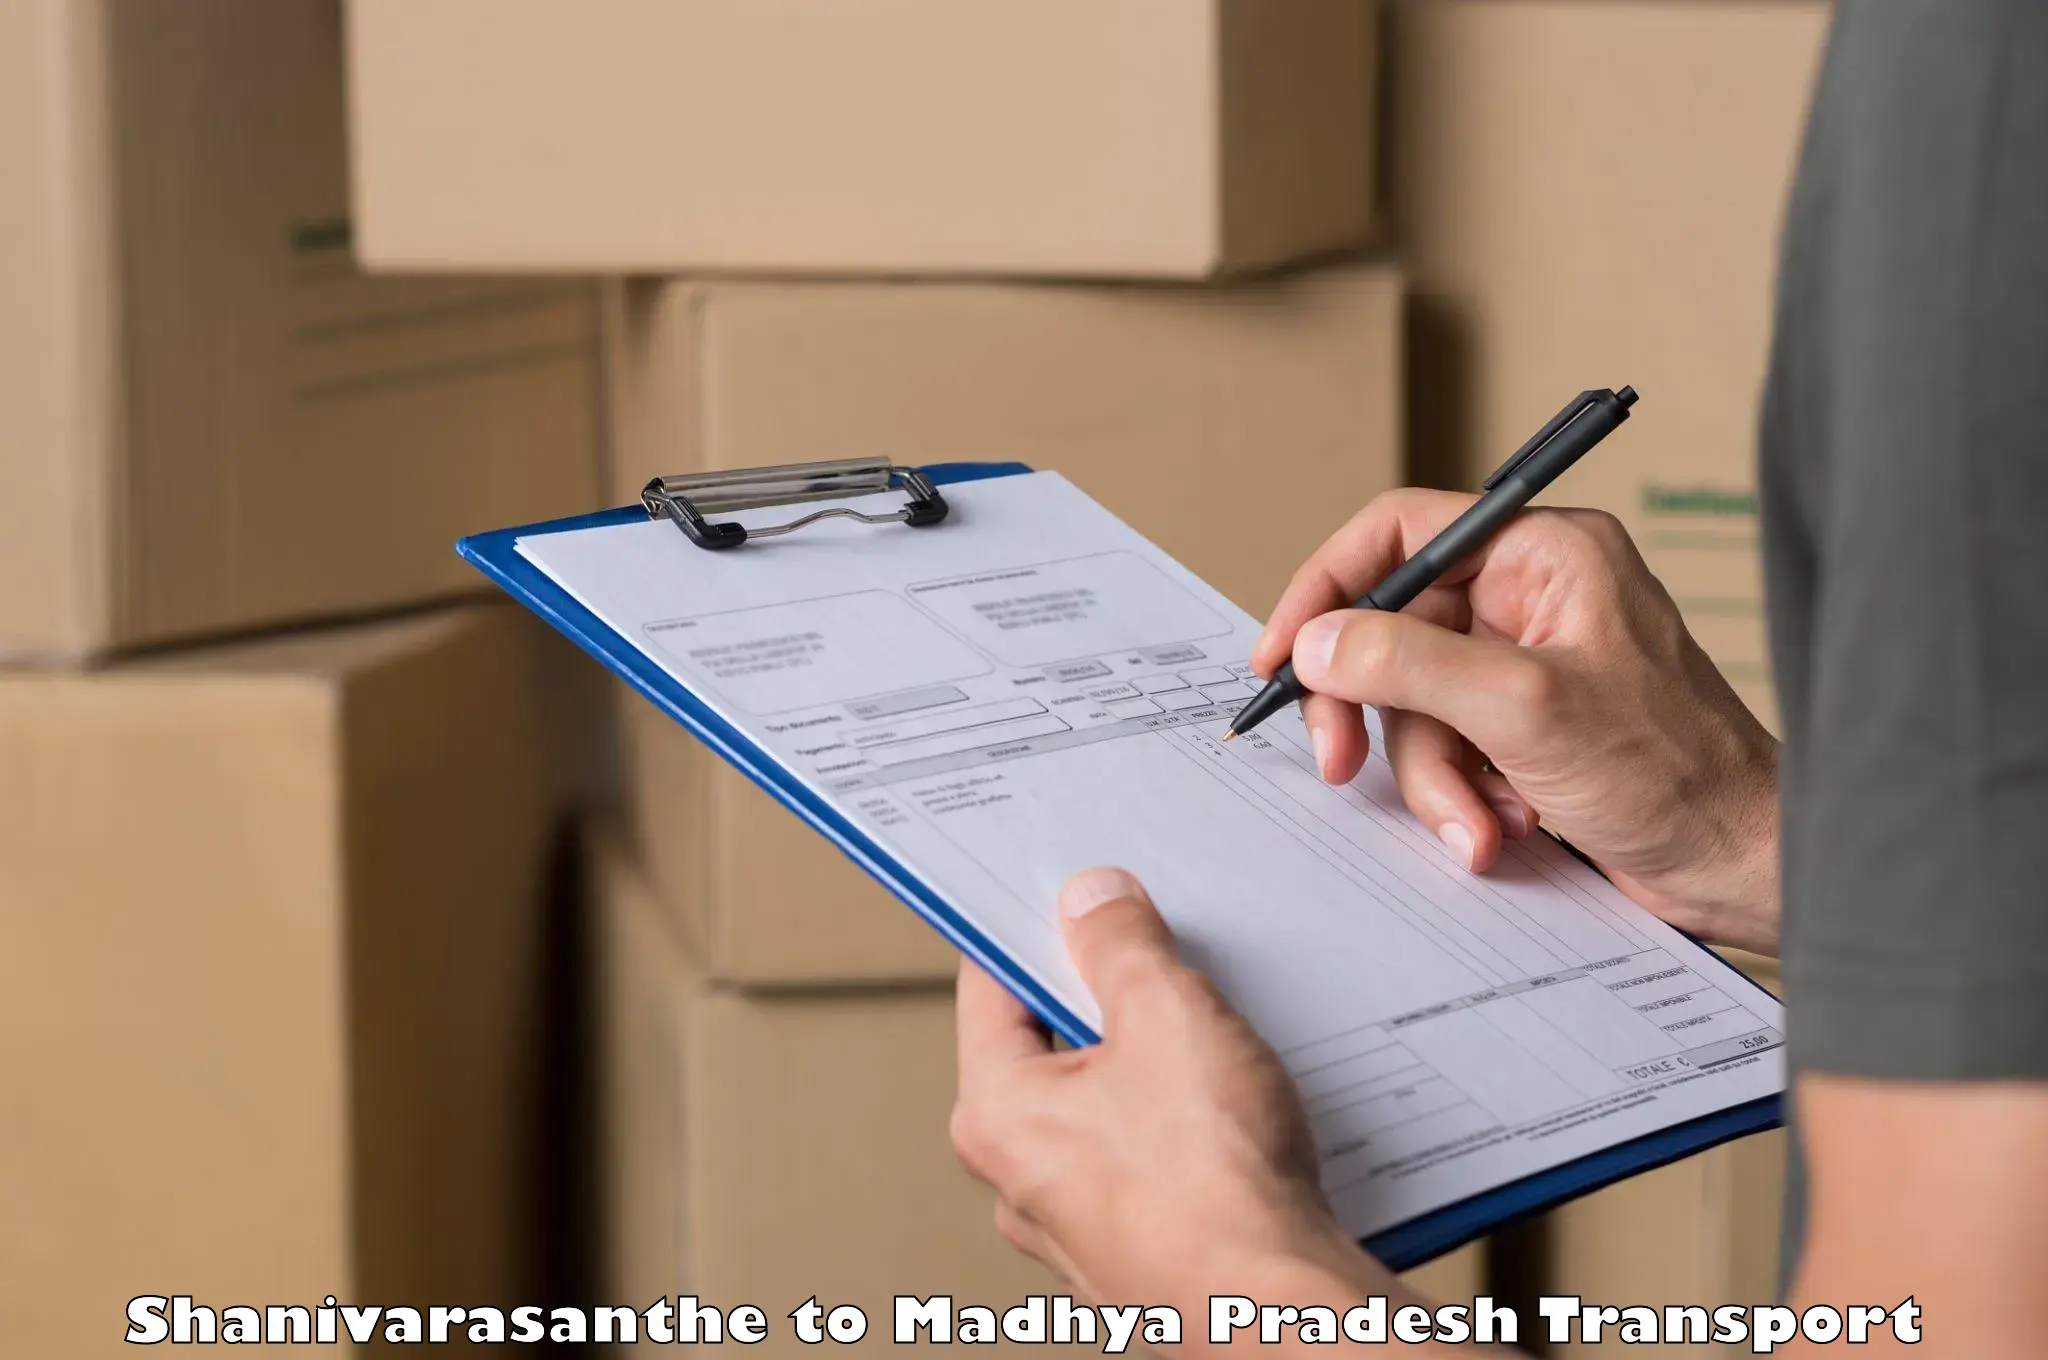 Container transport service Shanivarasanthe to Gwalior